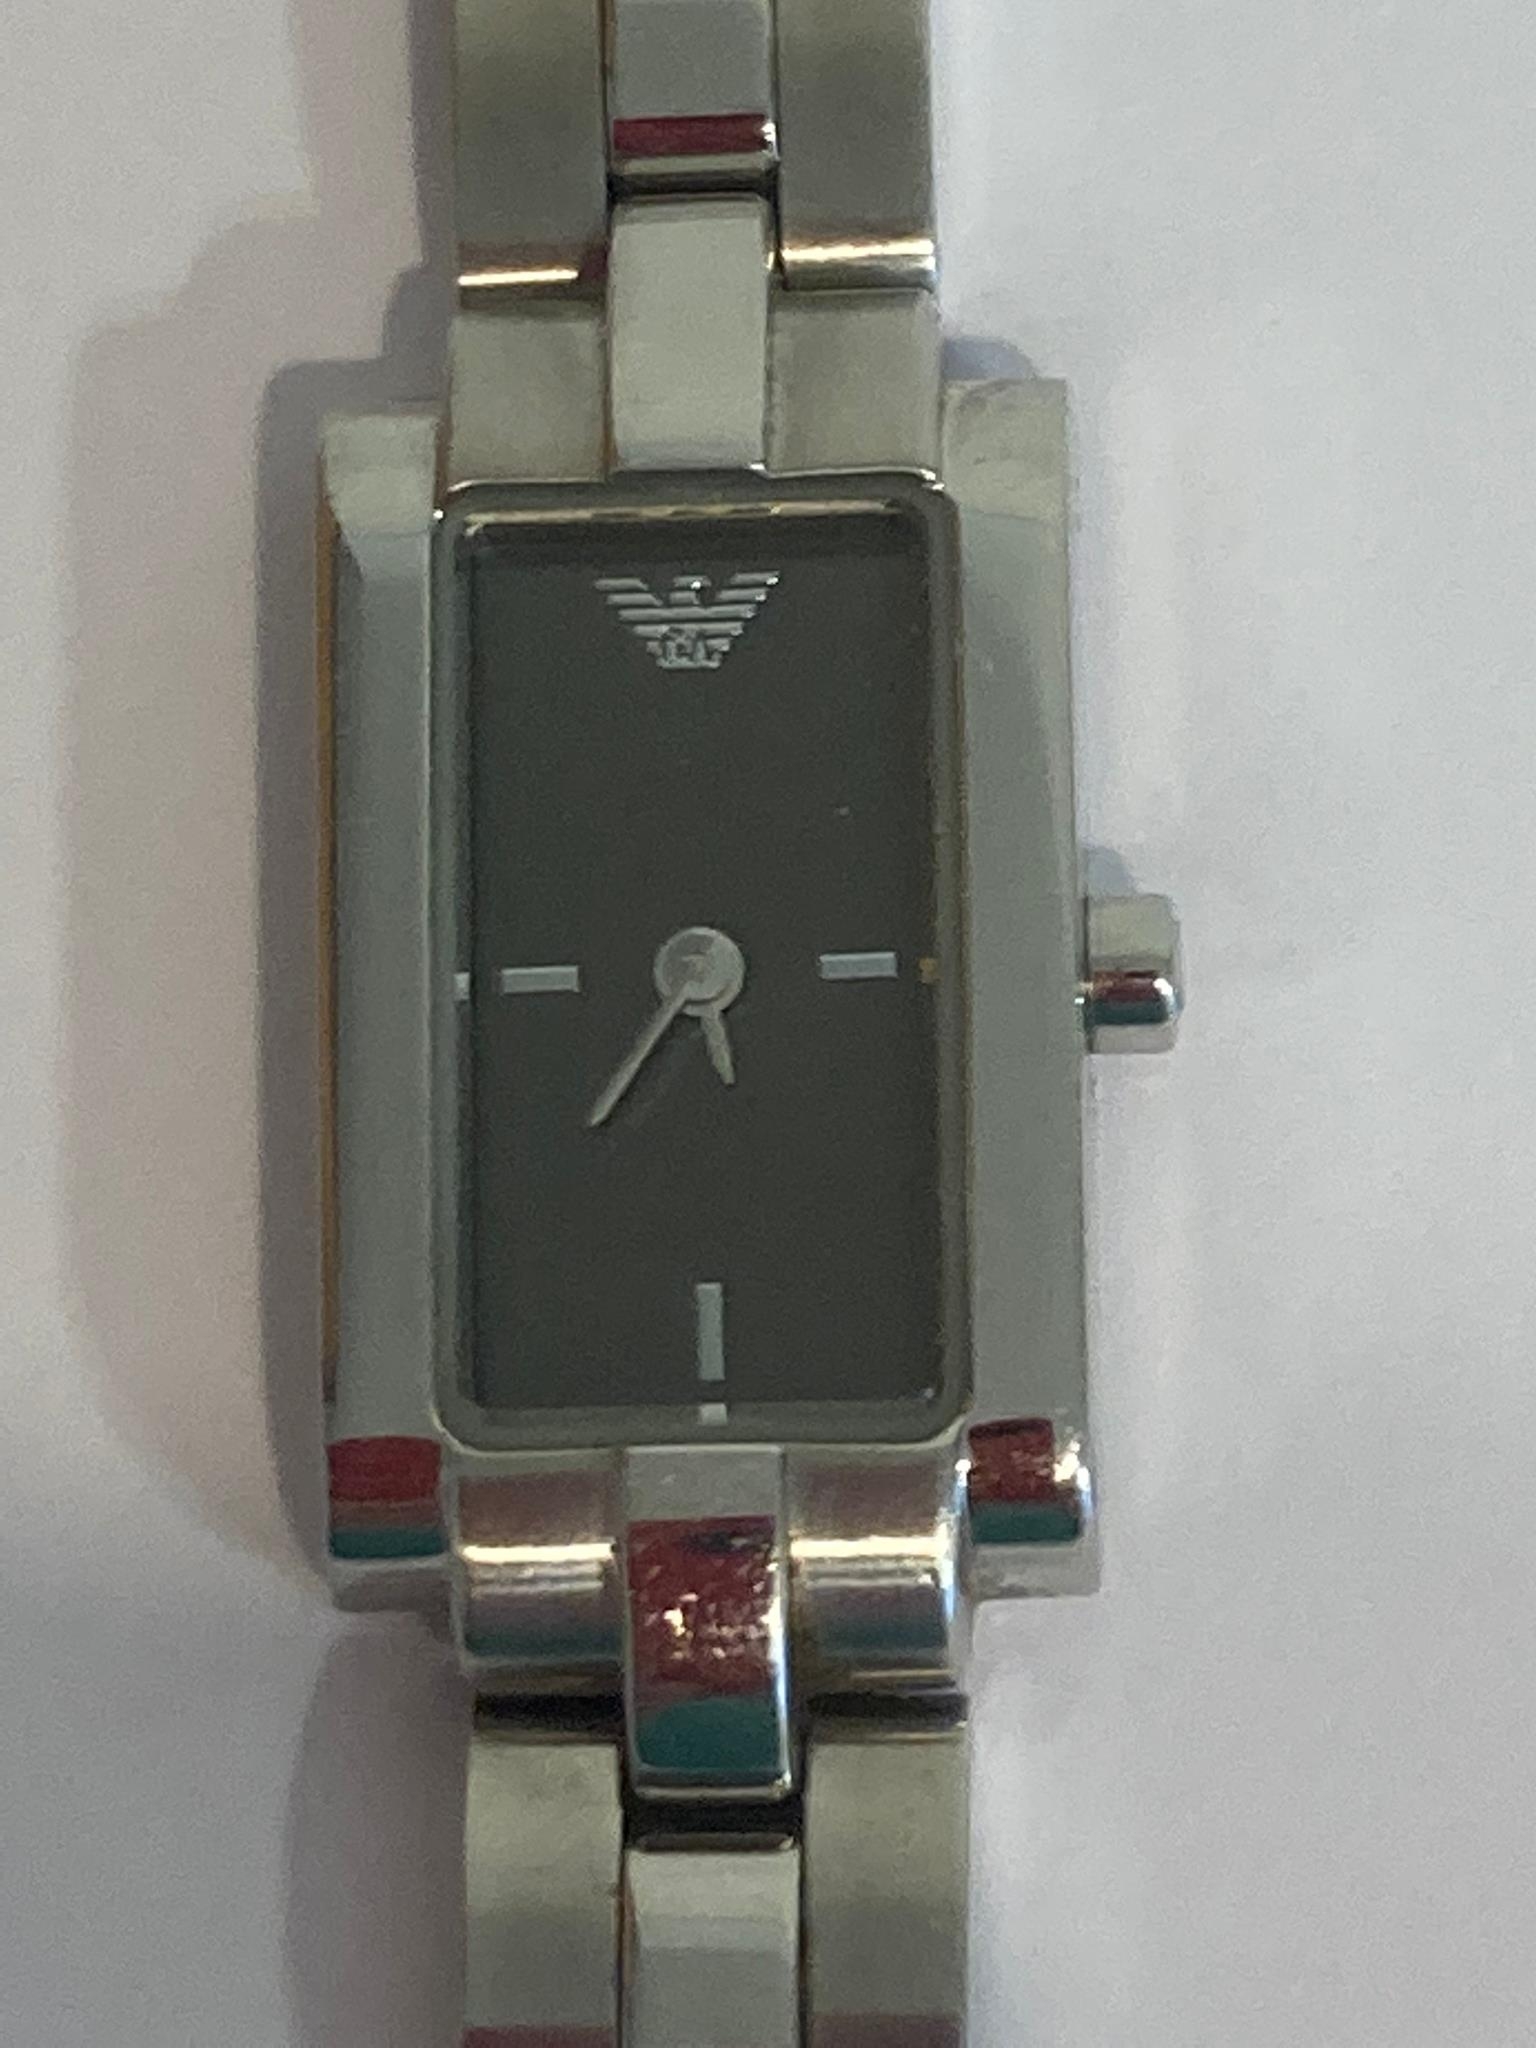 Ladies ARMANI AR5432 Quartz wristwatch. Black face square dial model, Finished in stainless steel